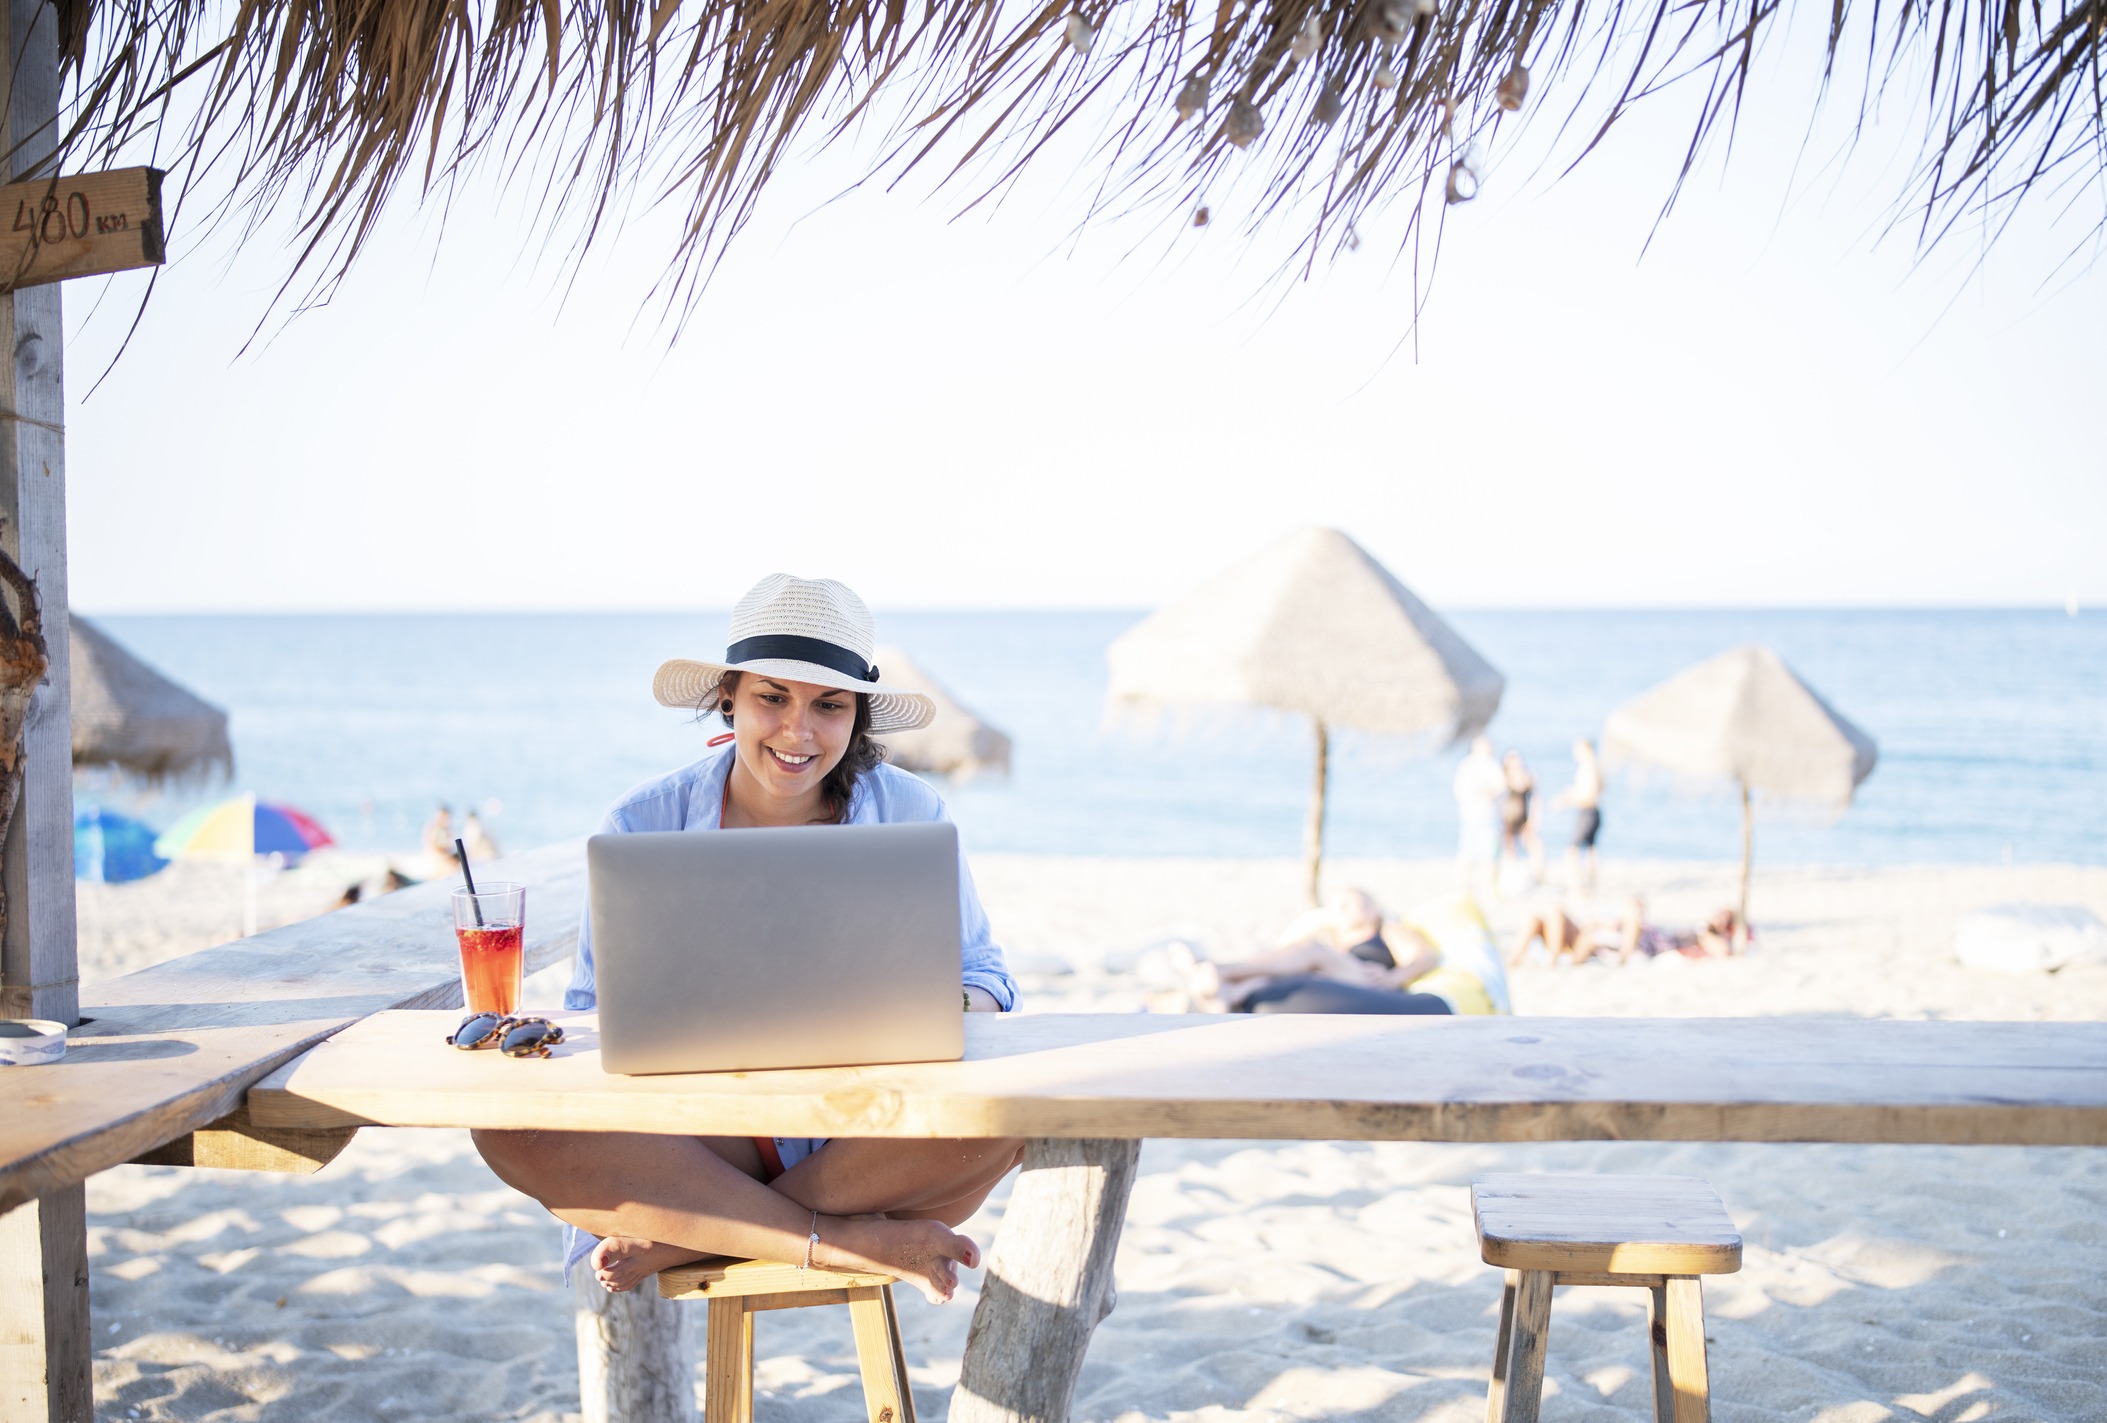 A woman working on a laptop on the beach.